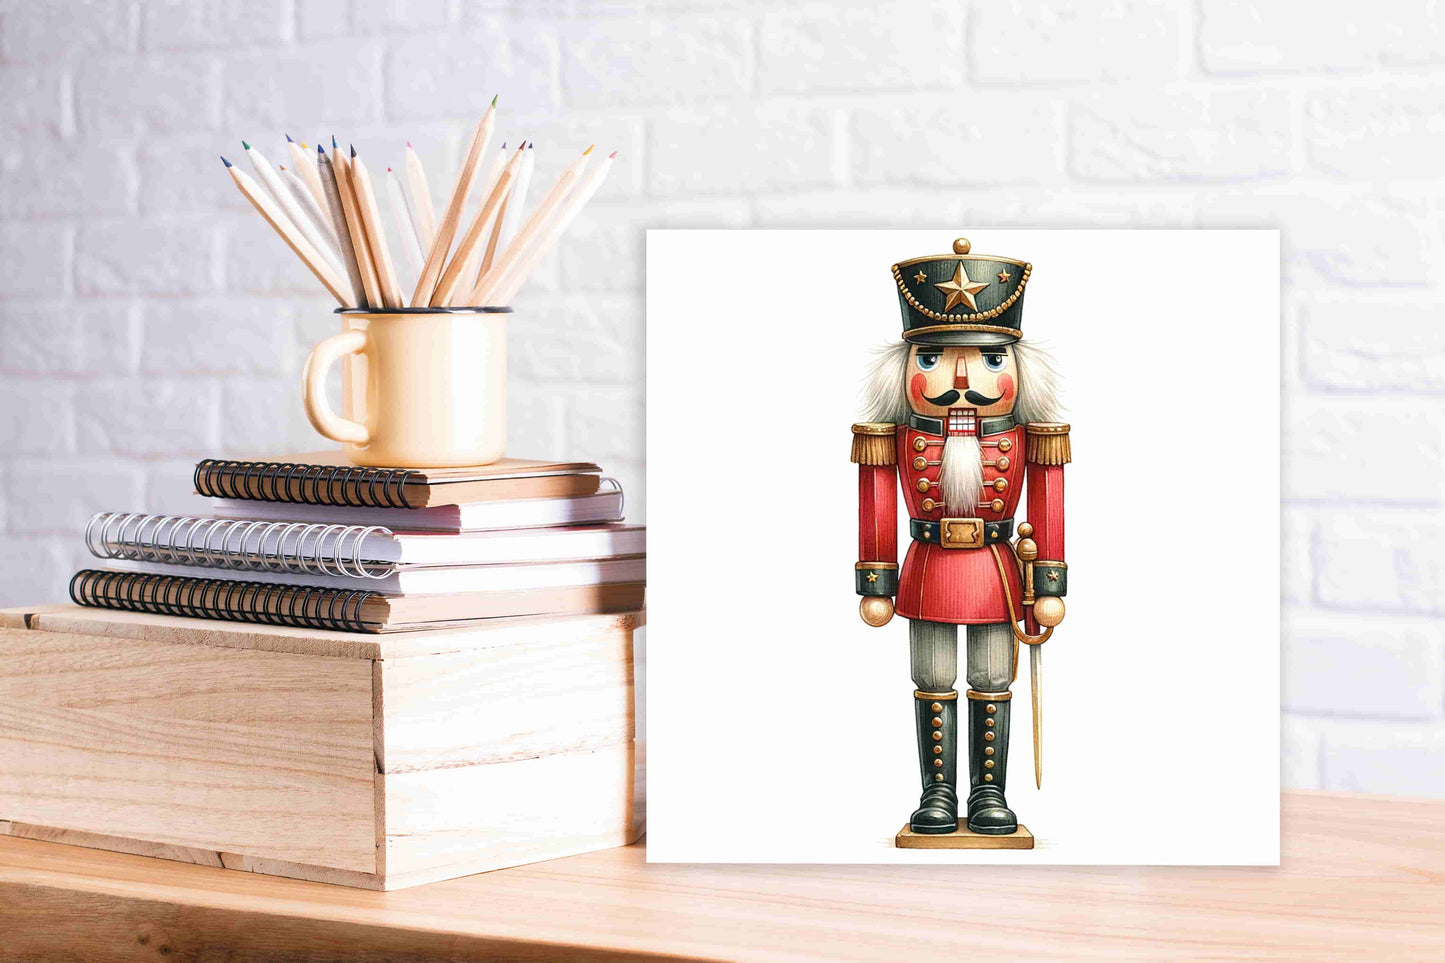 "Sovereign of Celebration - Nutcracker Soldier" Wrapped Canvas Wall Art Prints